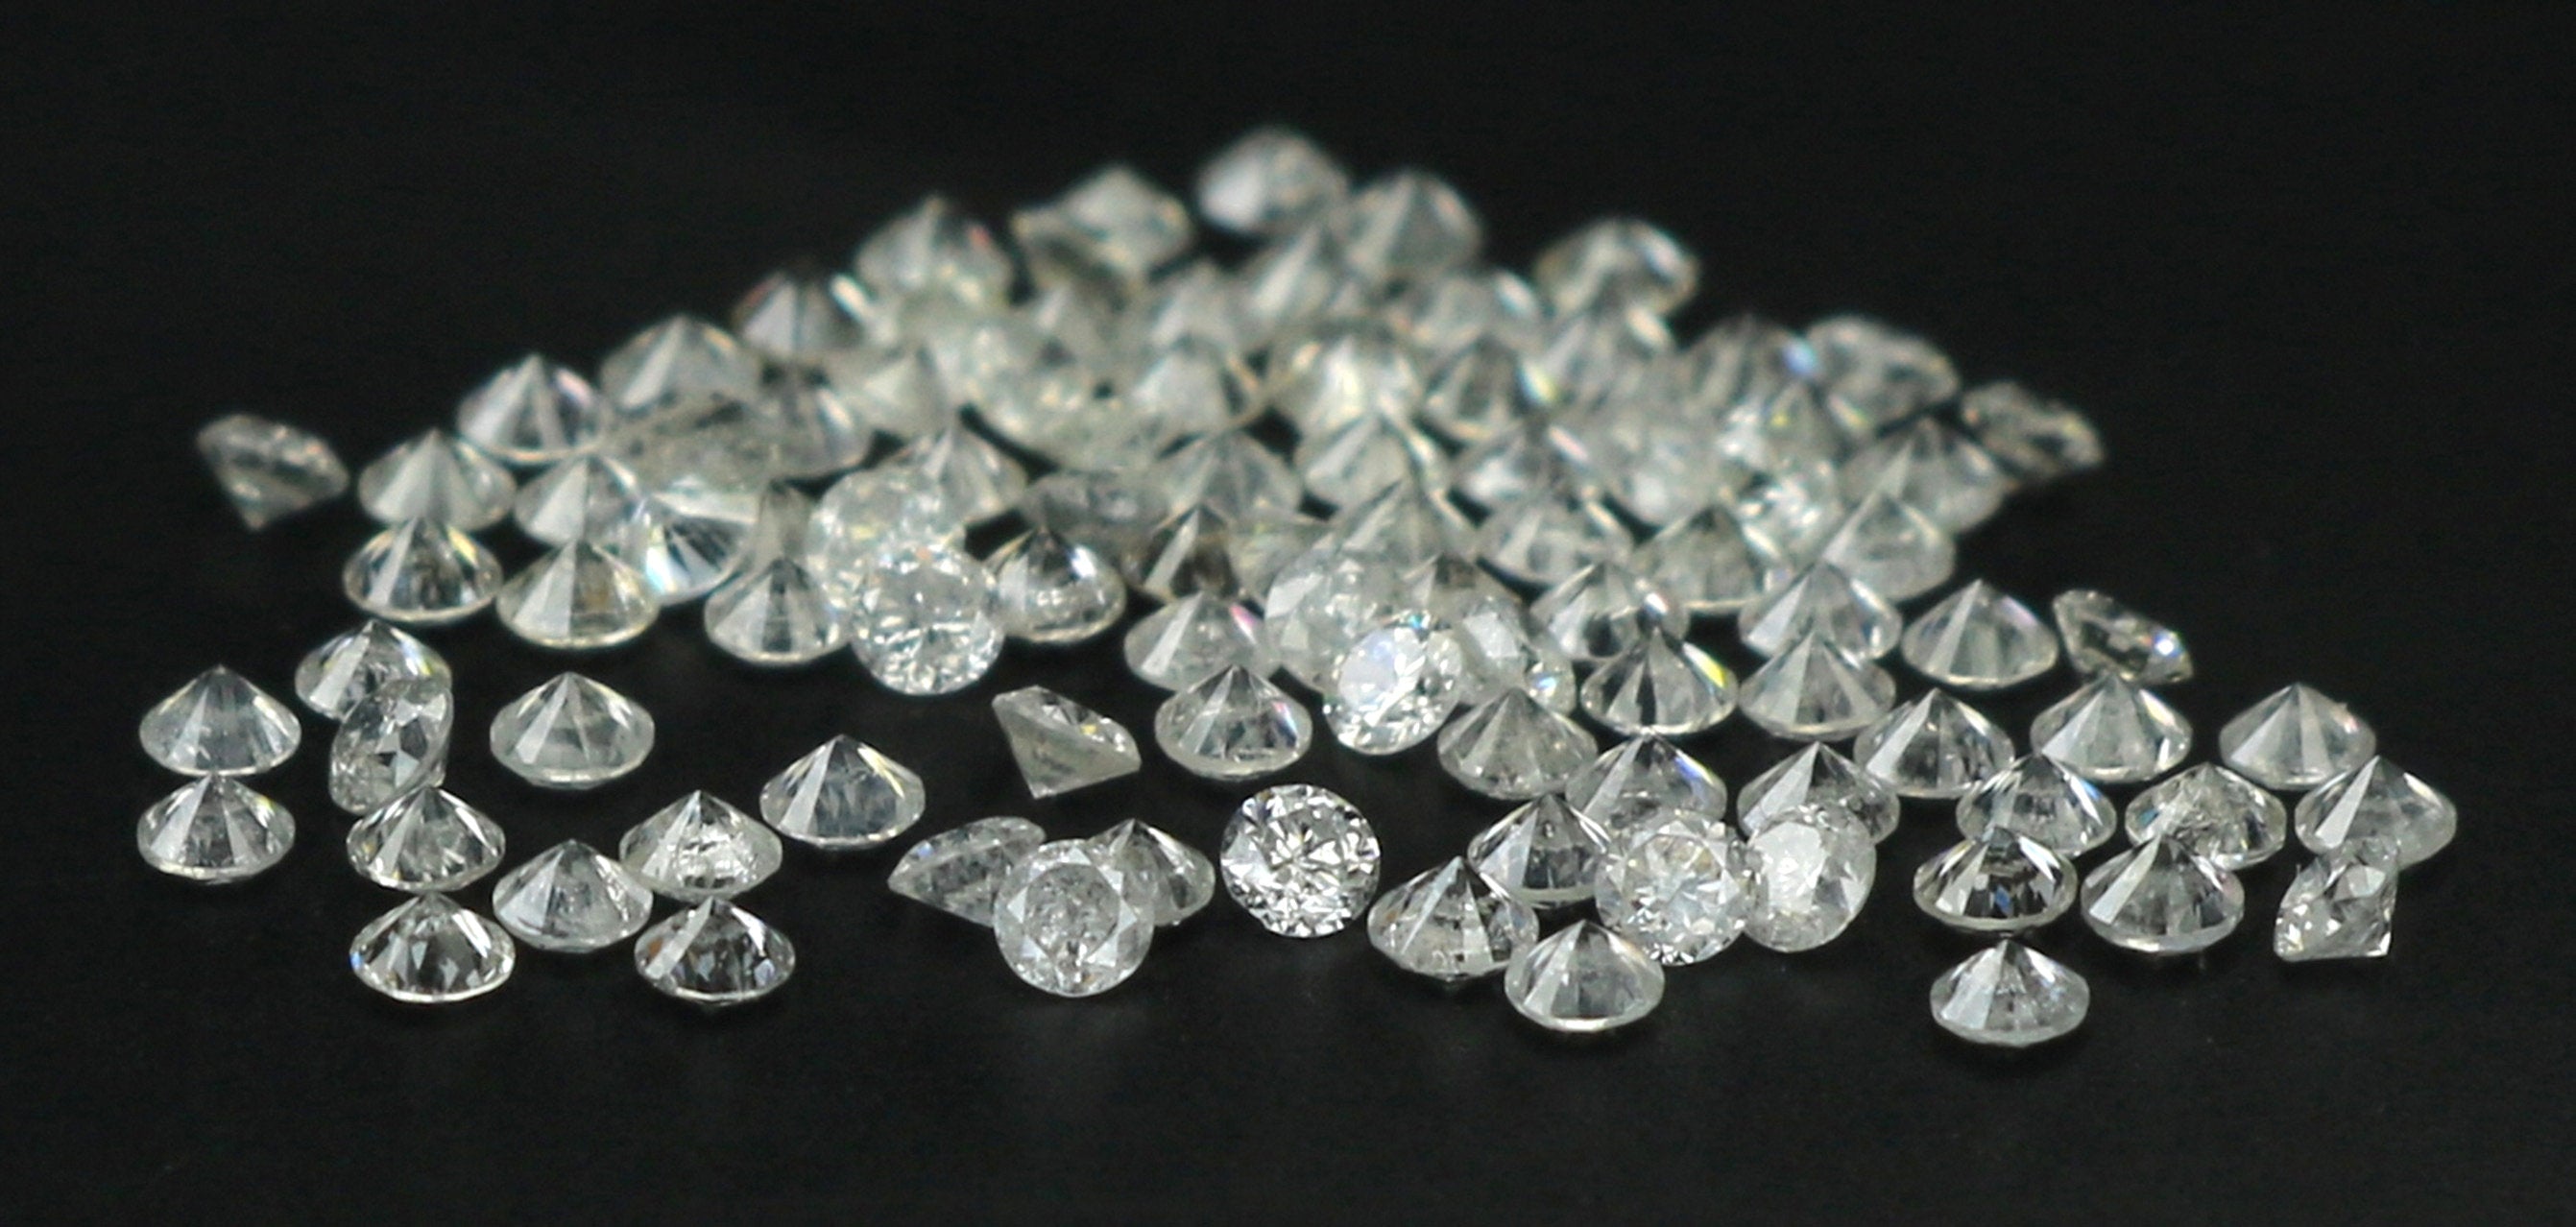 Natural Loose Diamond Round G-H White Color I1-I3 Clarity 1.10 to 1.25 MM 50 Pcs 100% REAL Diamond Q05